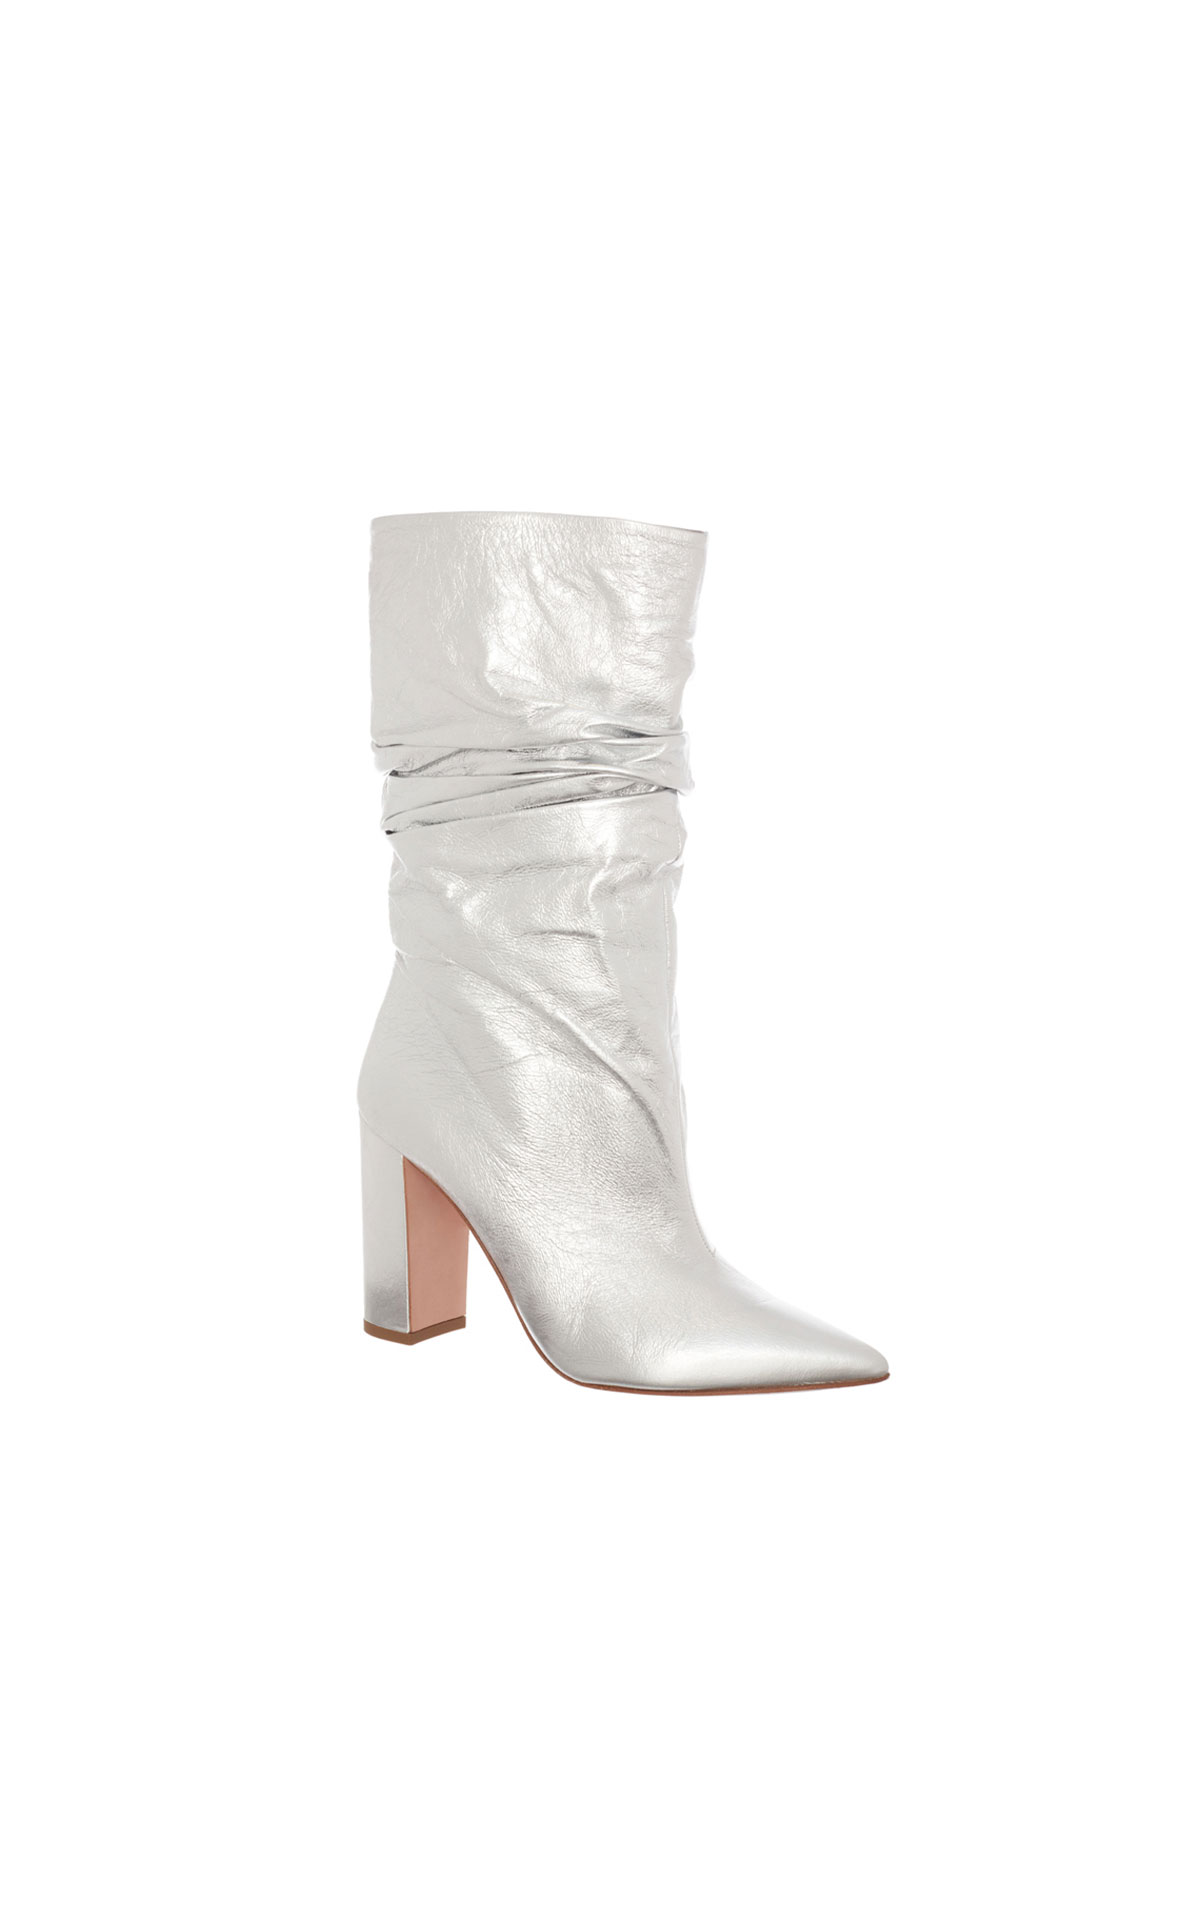 Gina Romant silver leather boot from Bicester Village